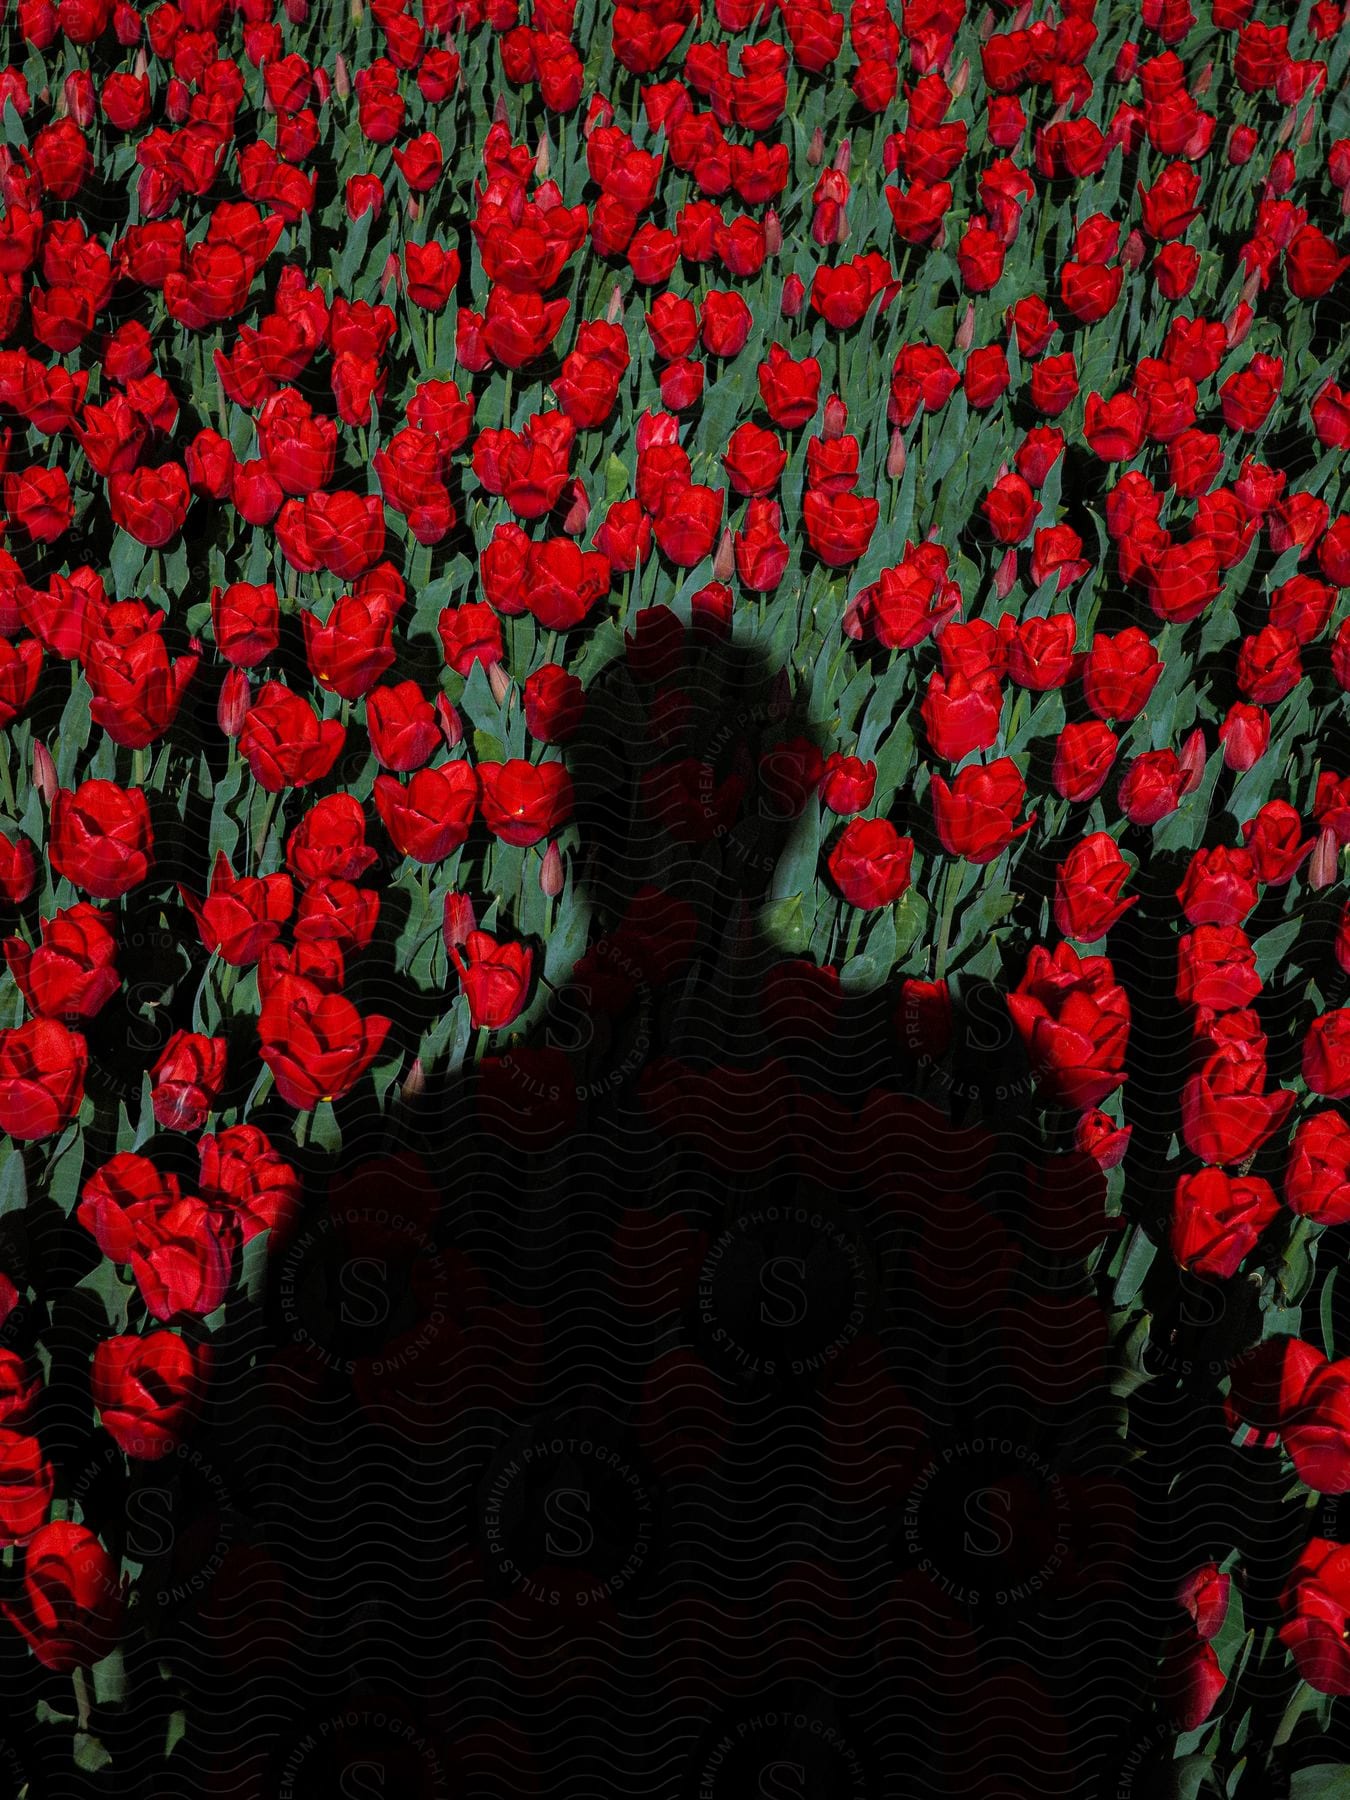 A black shadow looms over an illustrated field of red roses